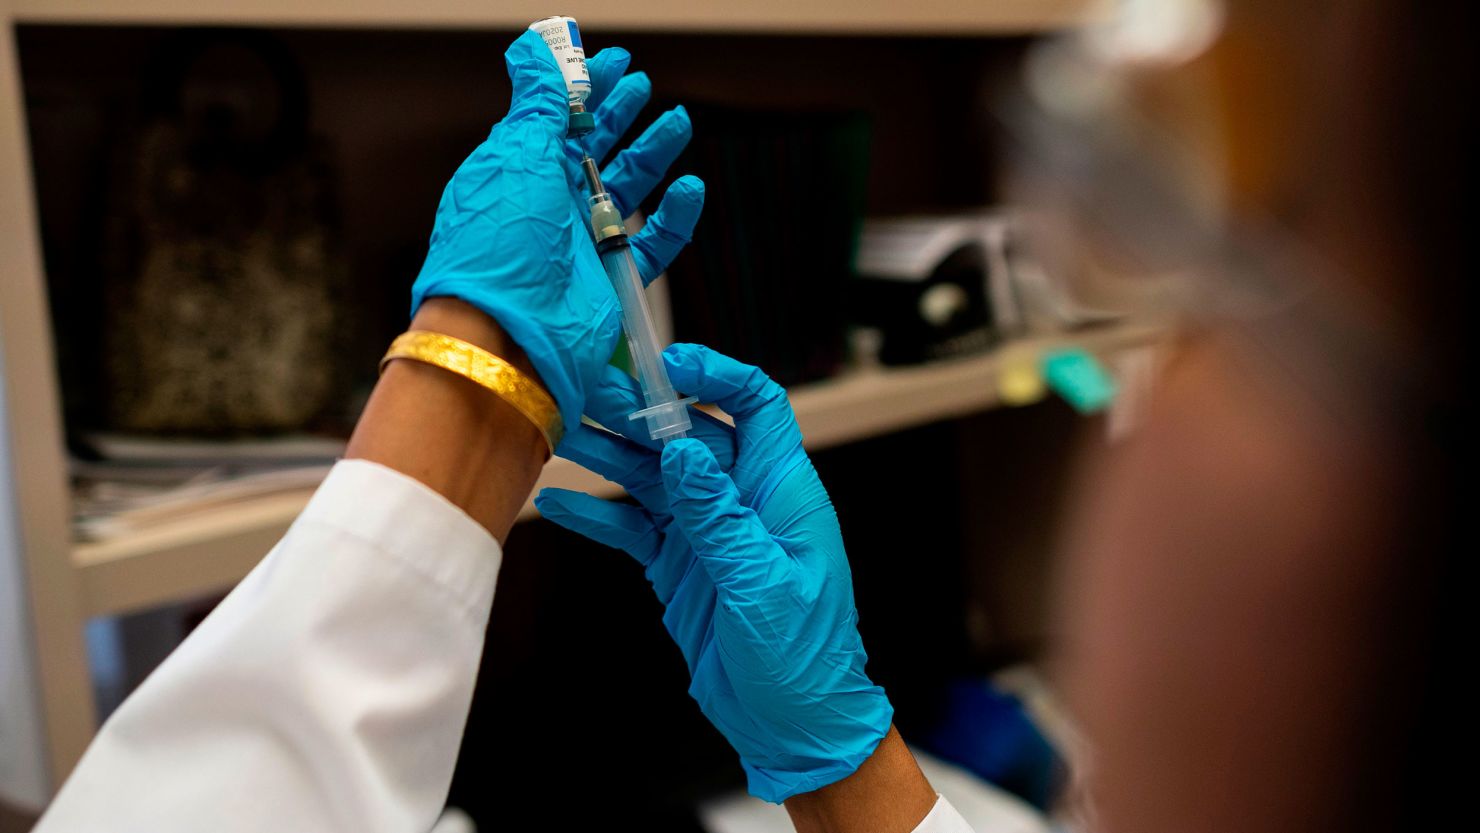 This picture taken on April 5, 2019 shows a nurse preparing the measles, mumps and rubella vaccine at the Rockland County Health Department in Haverstraw, Rockland County, New York. - A measles outbreak in the area has sickened scores of people and caused the county to bar unvaccinated minors in public places. (Photo by Johannes EISELE / AFP) / With AFP Story by Catherine TRIOMPHE: NY county measles outbreak spotlights vaccine religious exemptions        (Photo credit should read JOHANNES EISELE/AFP via Getty Images)